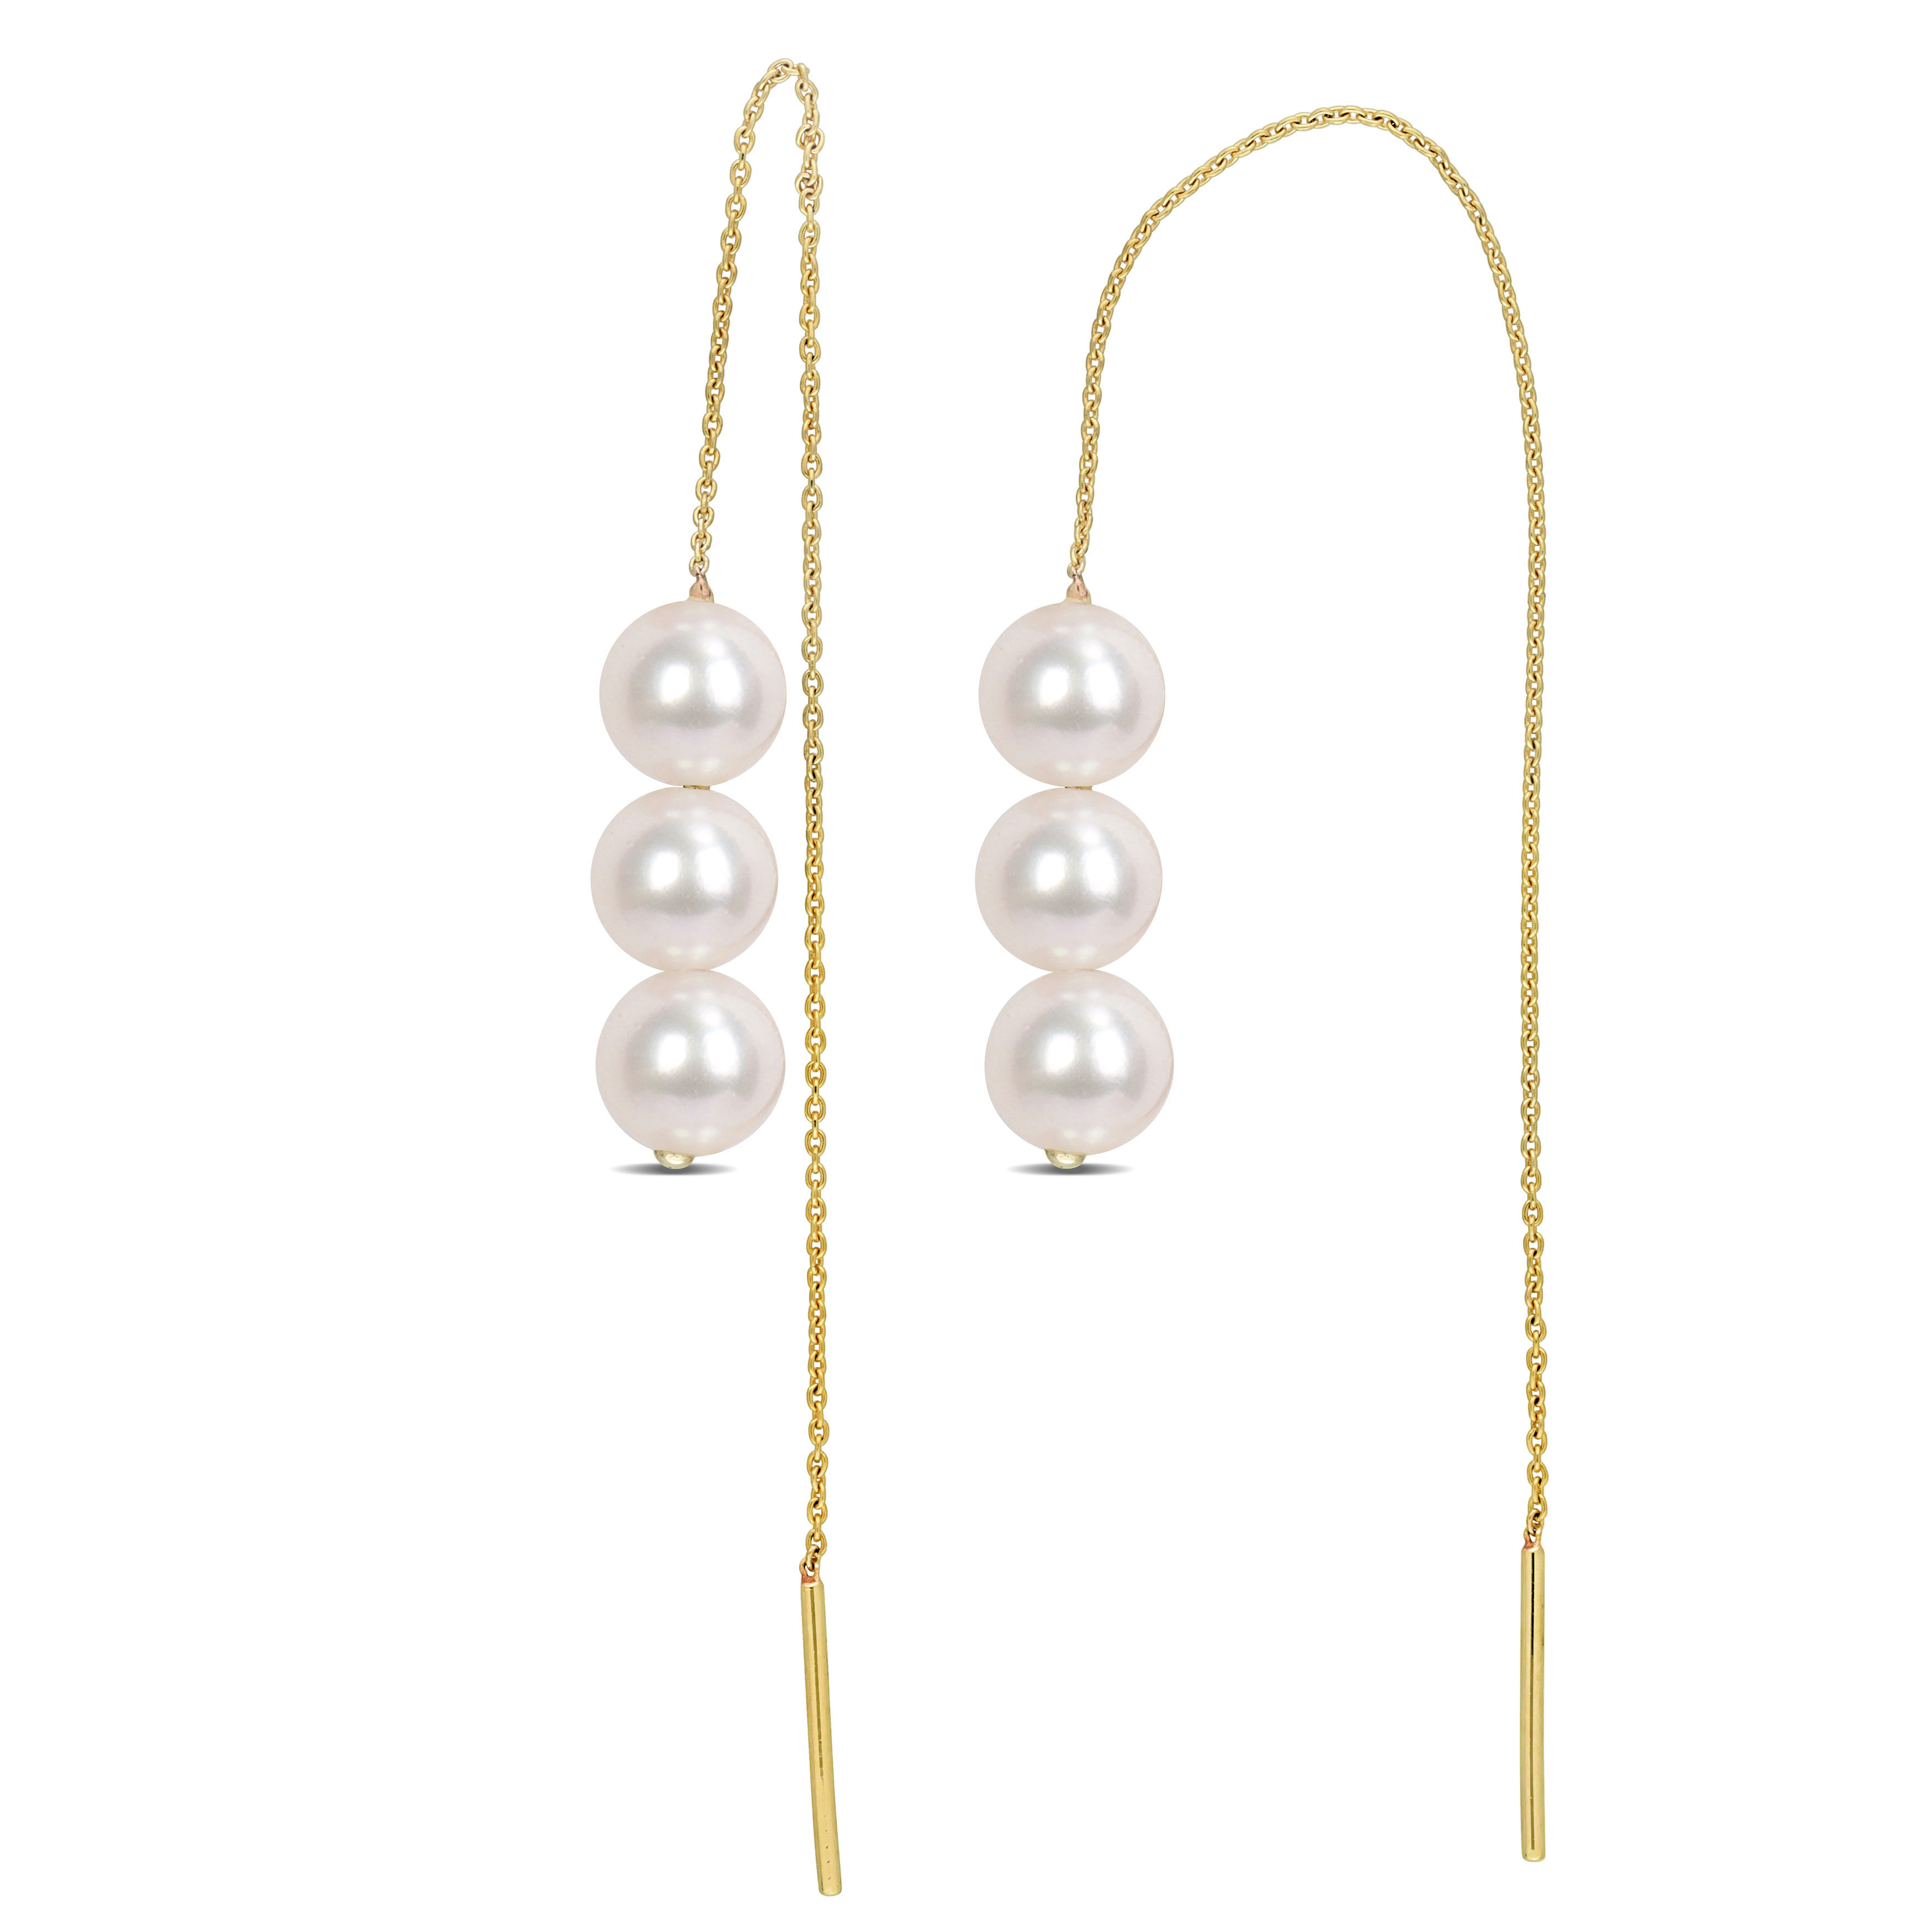 6 - 6.5 MM Freshwater Cultured Pearl Threader Earrings in 10k Yellow Gold